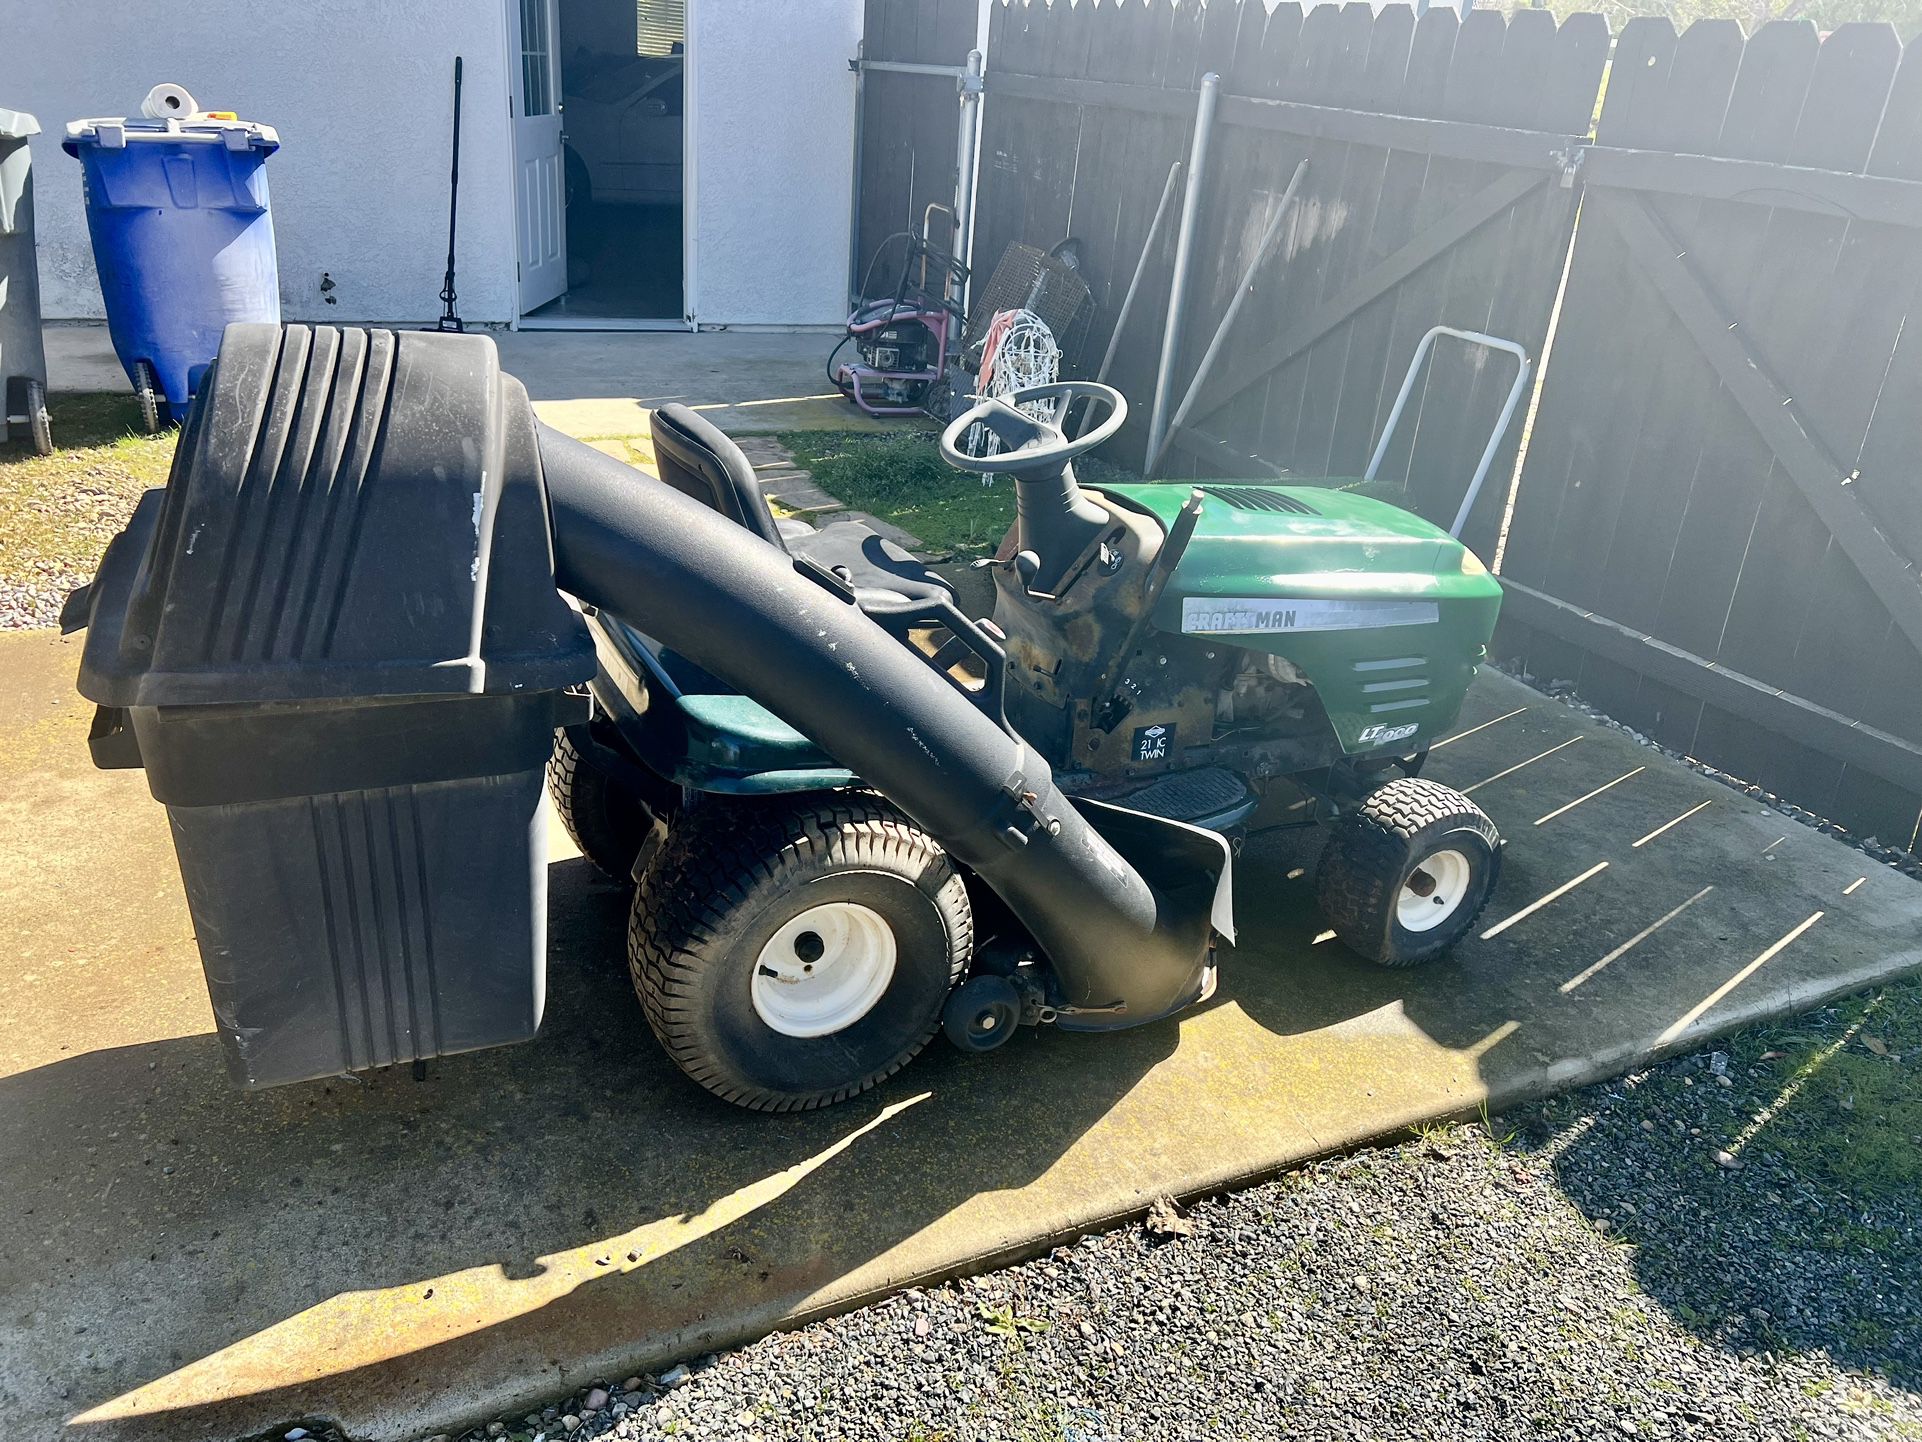 Craftsman Lt1000 Riding Lawn Mower For Sale In Escondido Ca Offerup